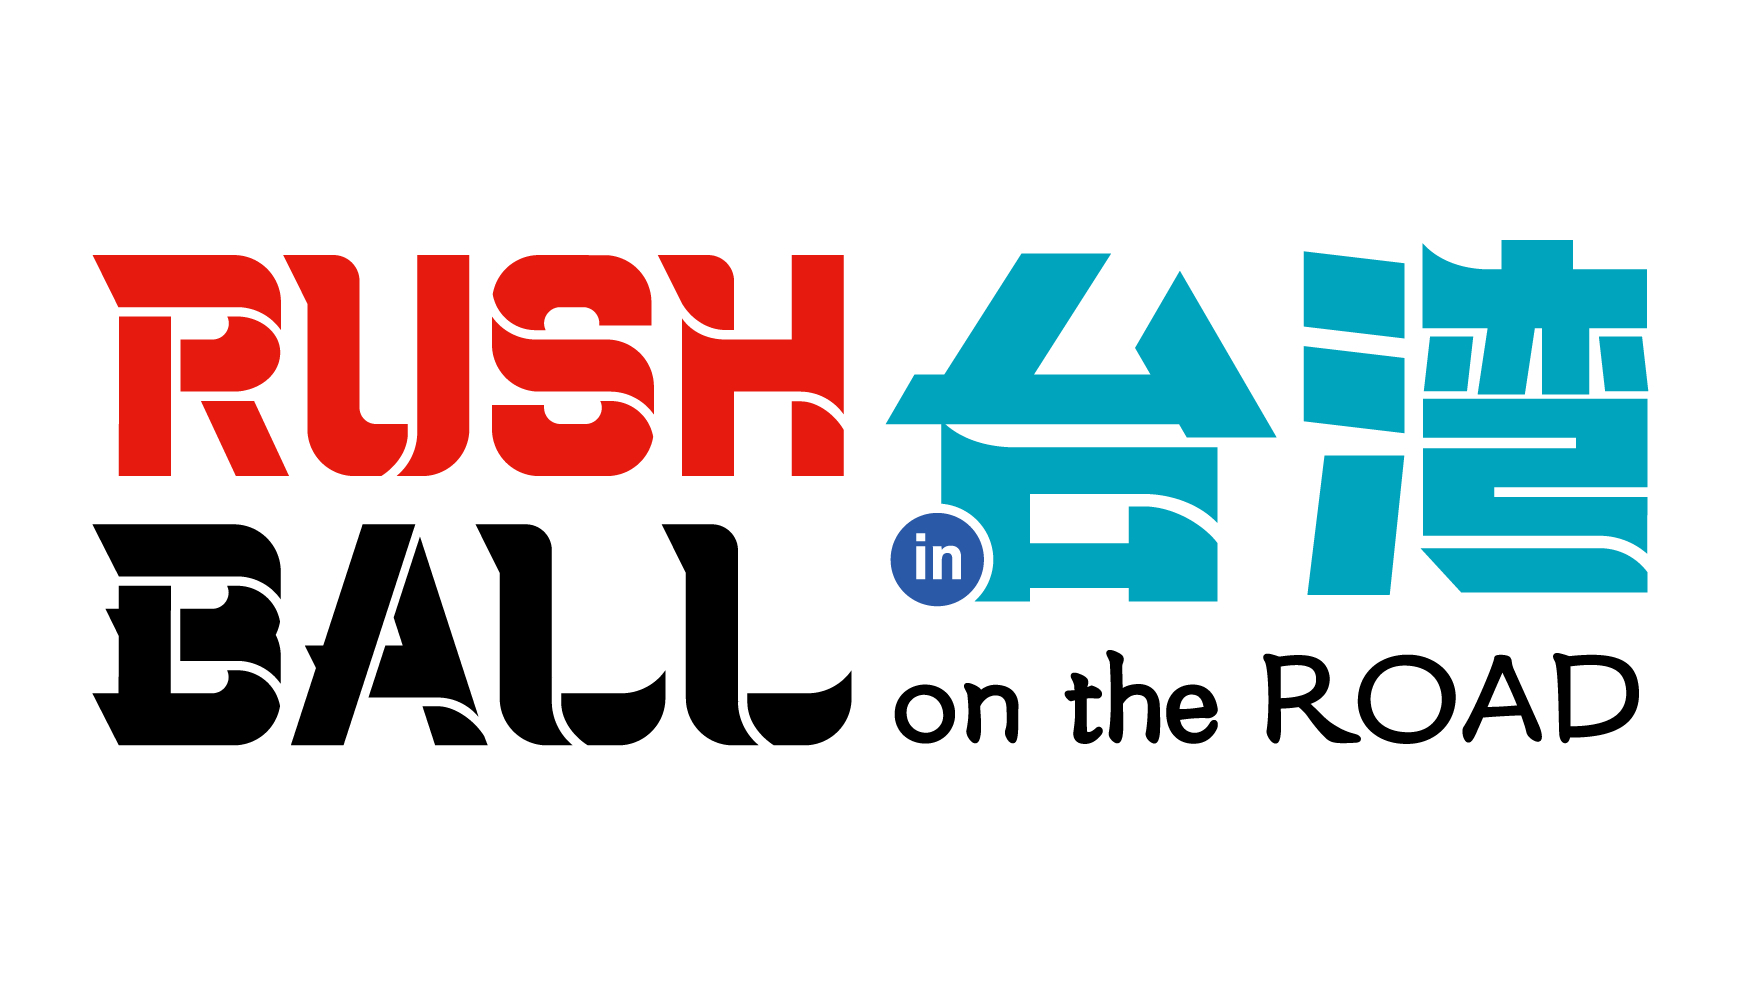 『RUSH BALL in 台湾 on the ROAD』